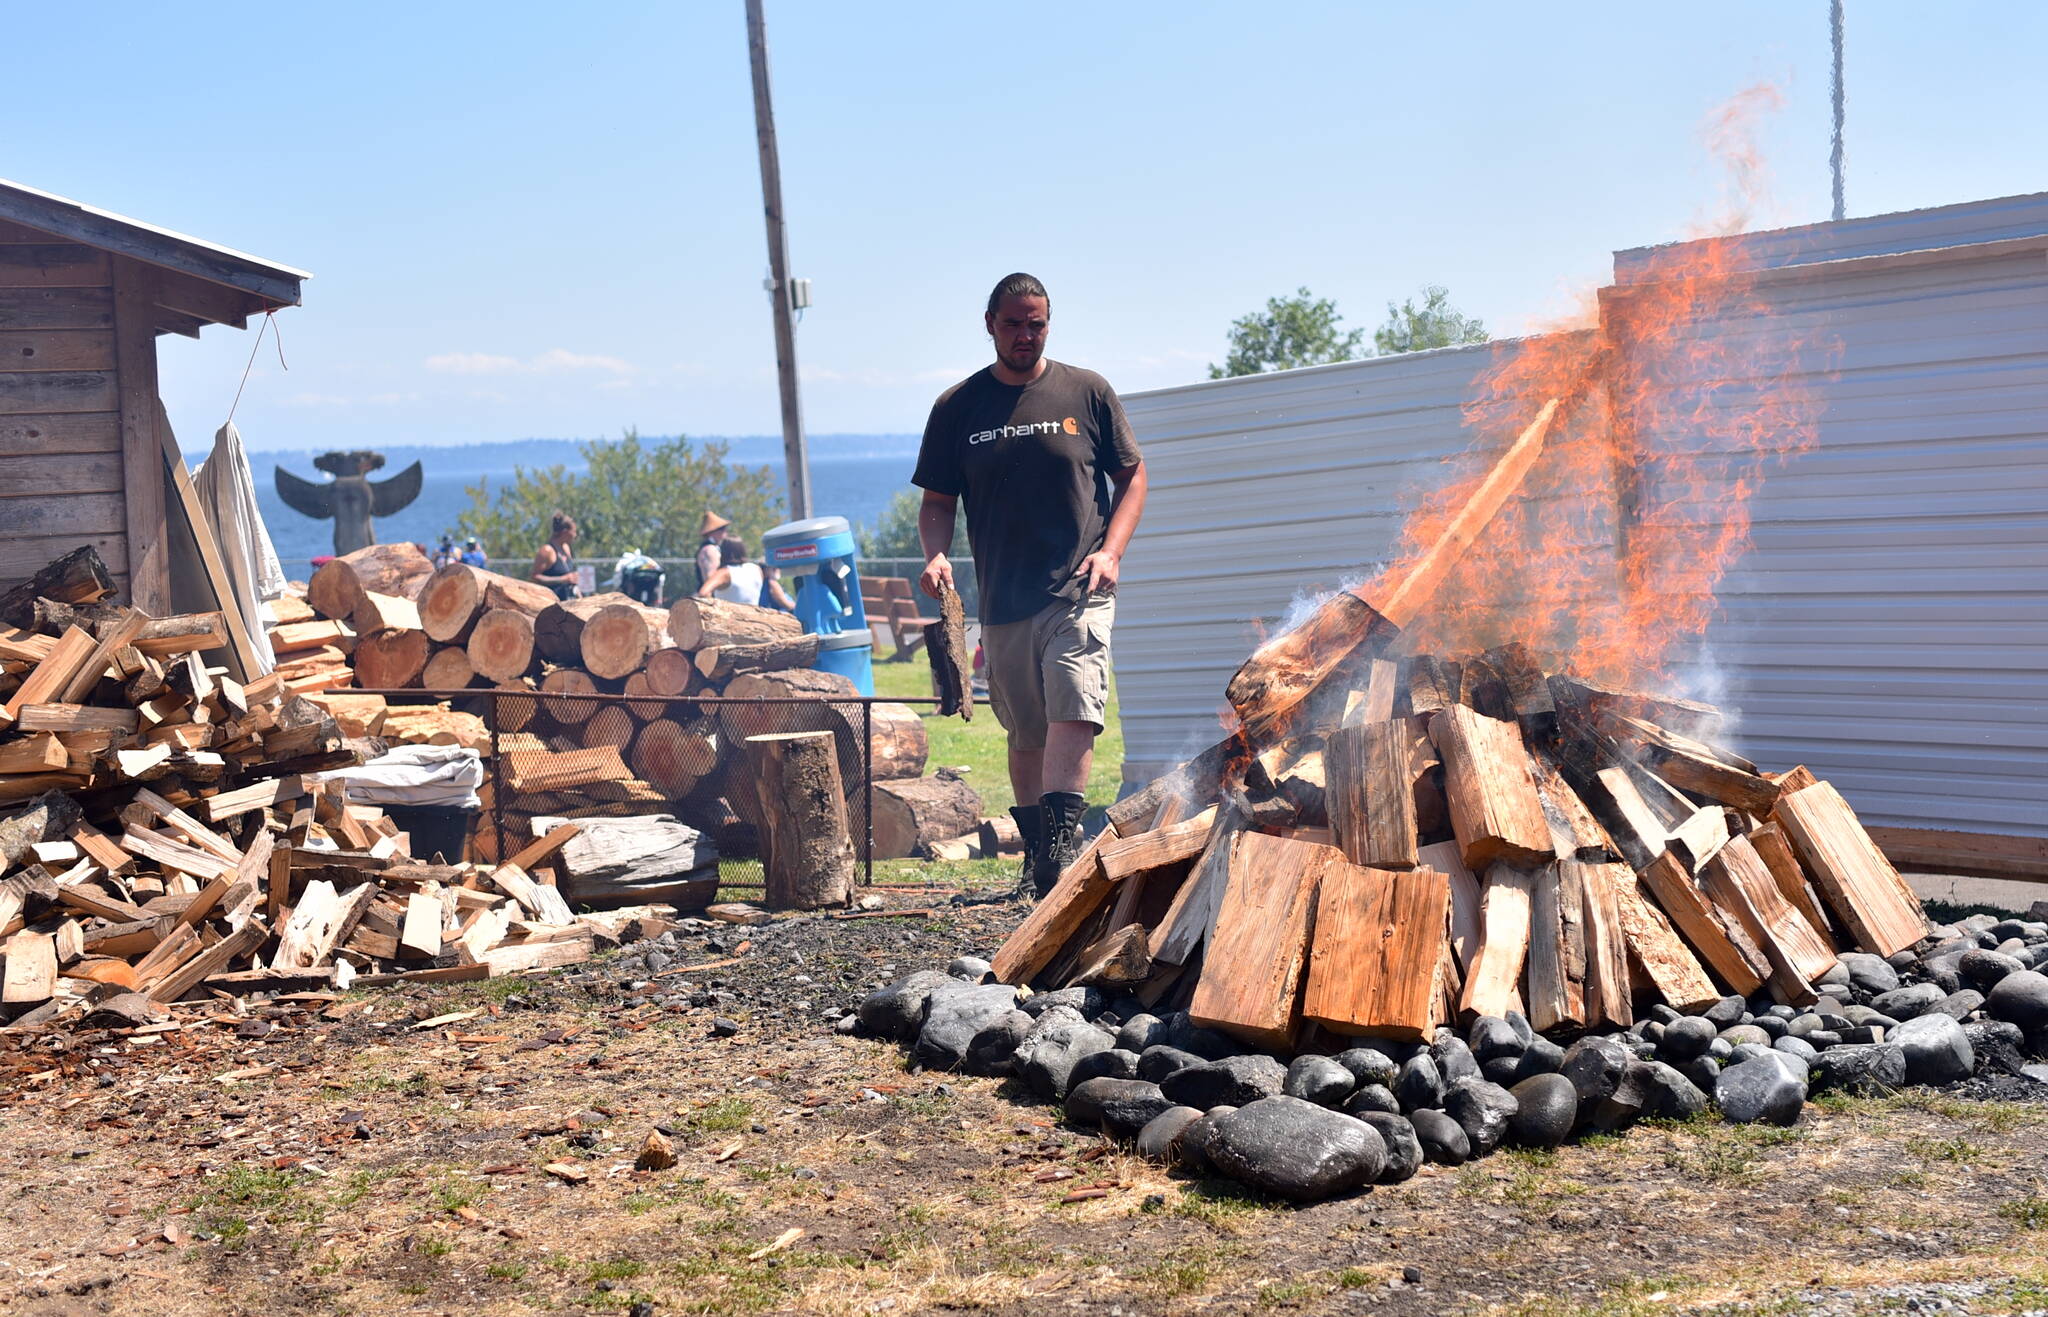 A fire piled high with wood cooks clams for the gathering.